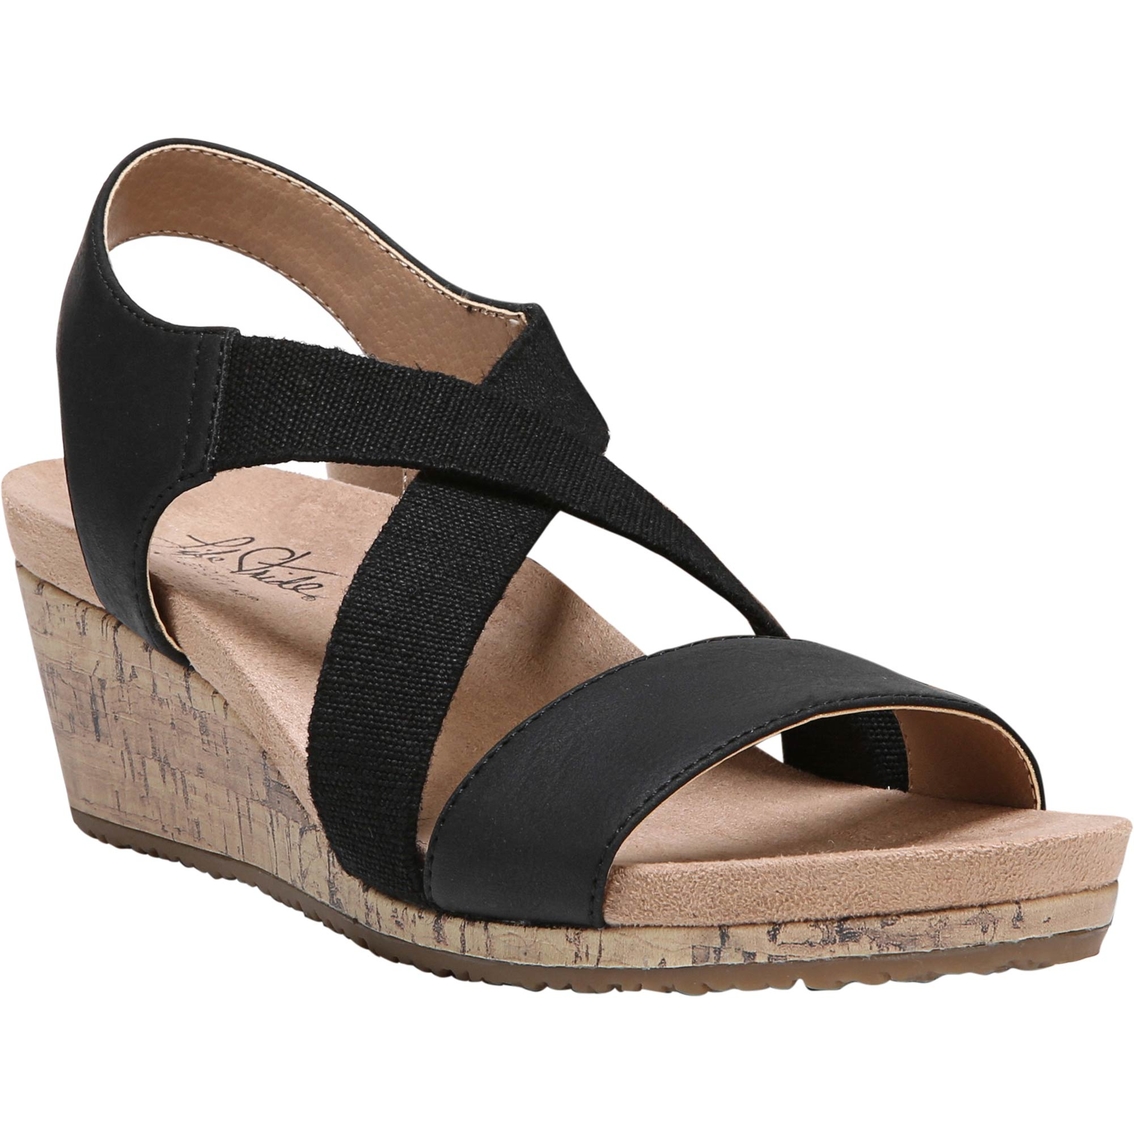 Lifestride Mexico Casual Wedge Sandals | Sandals | Shoes | Shop The ...